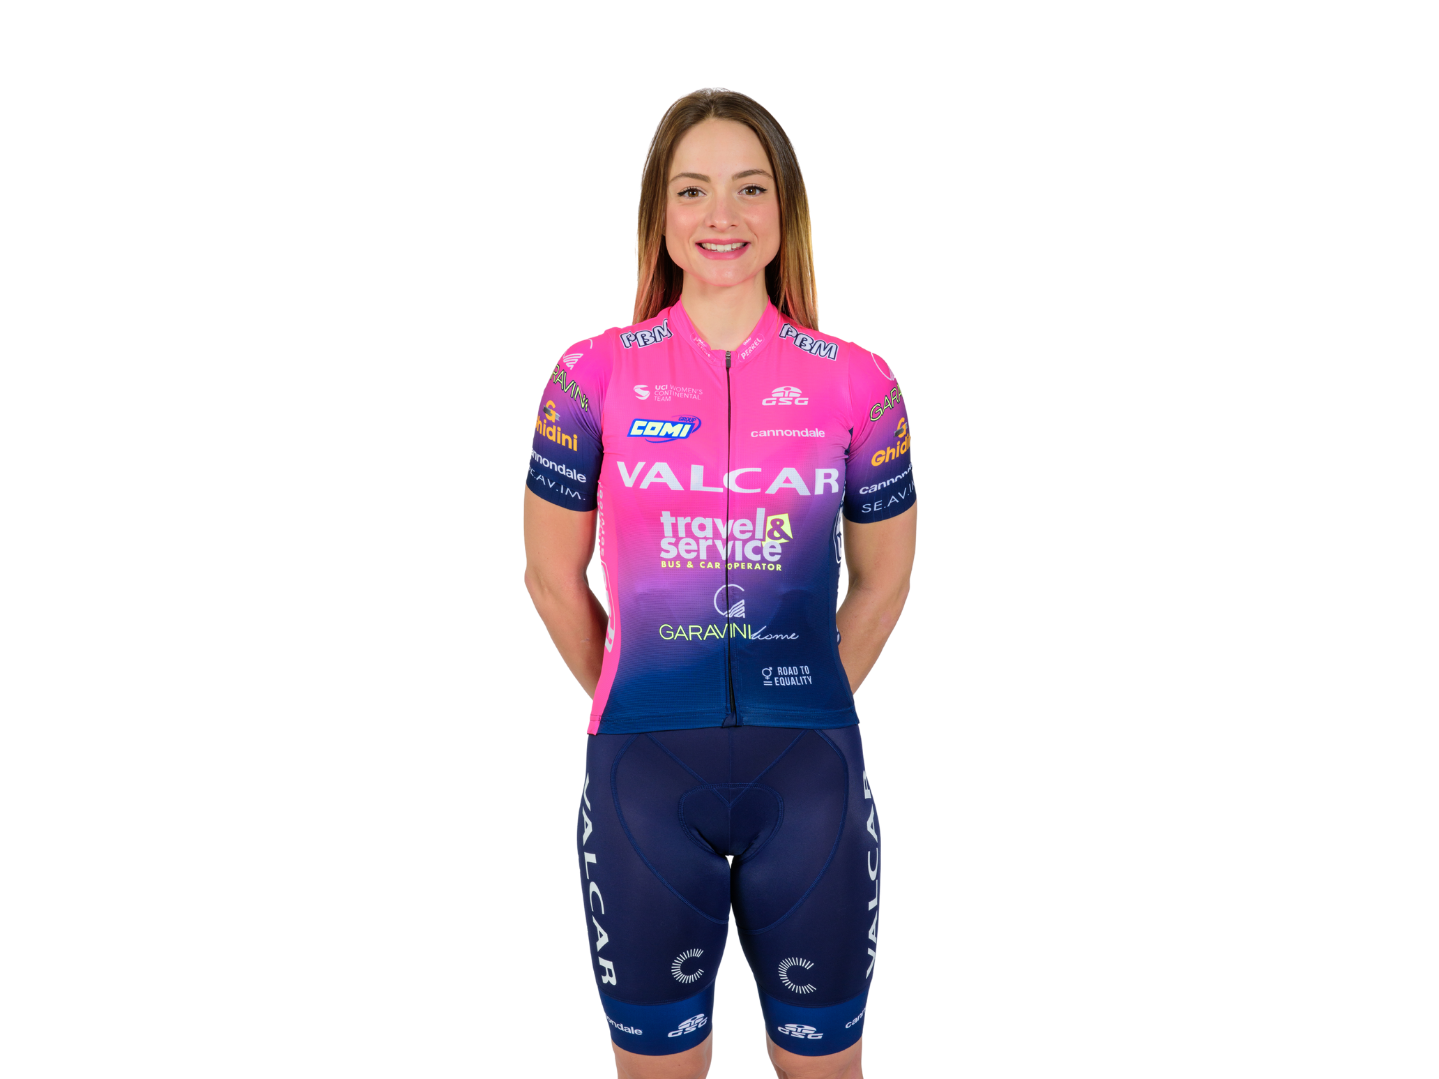 Here is the new Valcar – Travel & Service 2022 jersey, the debut at the Vuelta Comunitat Valenciana Féminas is approaching